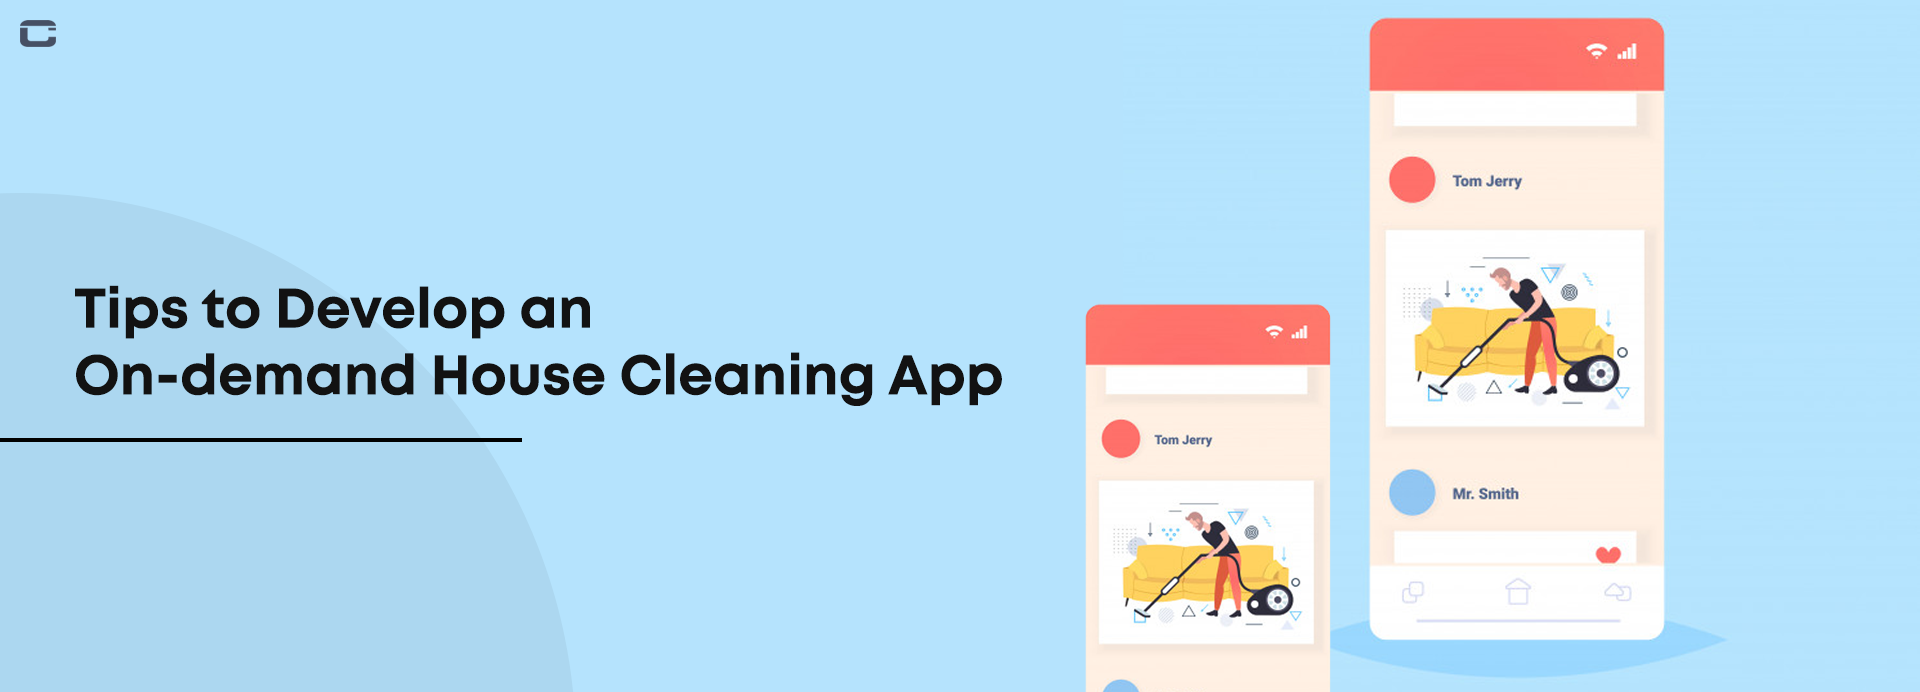 Why do we need to Develop a House Cleaning App? Tips to Develop a Successful On-demand House Cleaning Service App